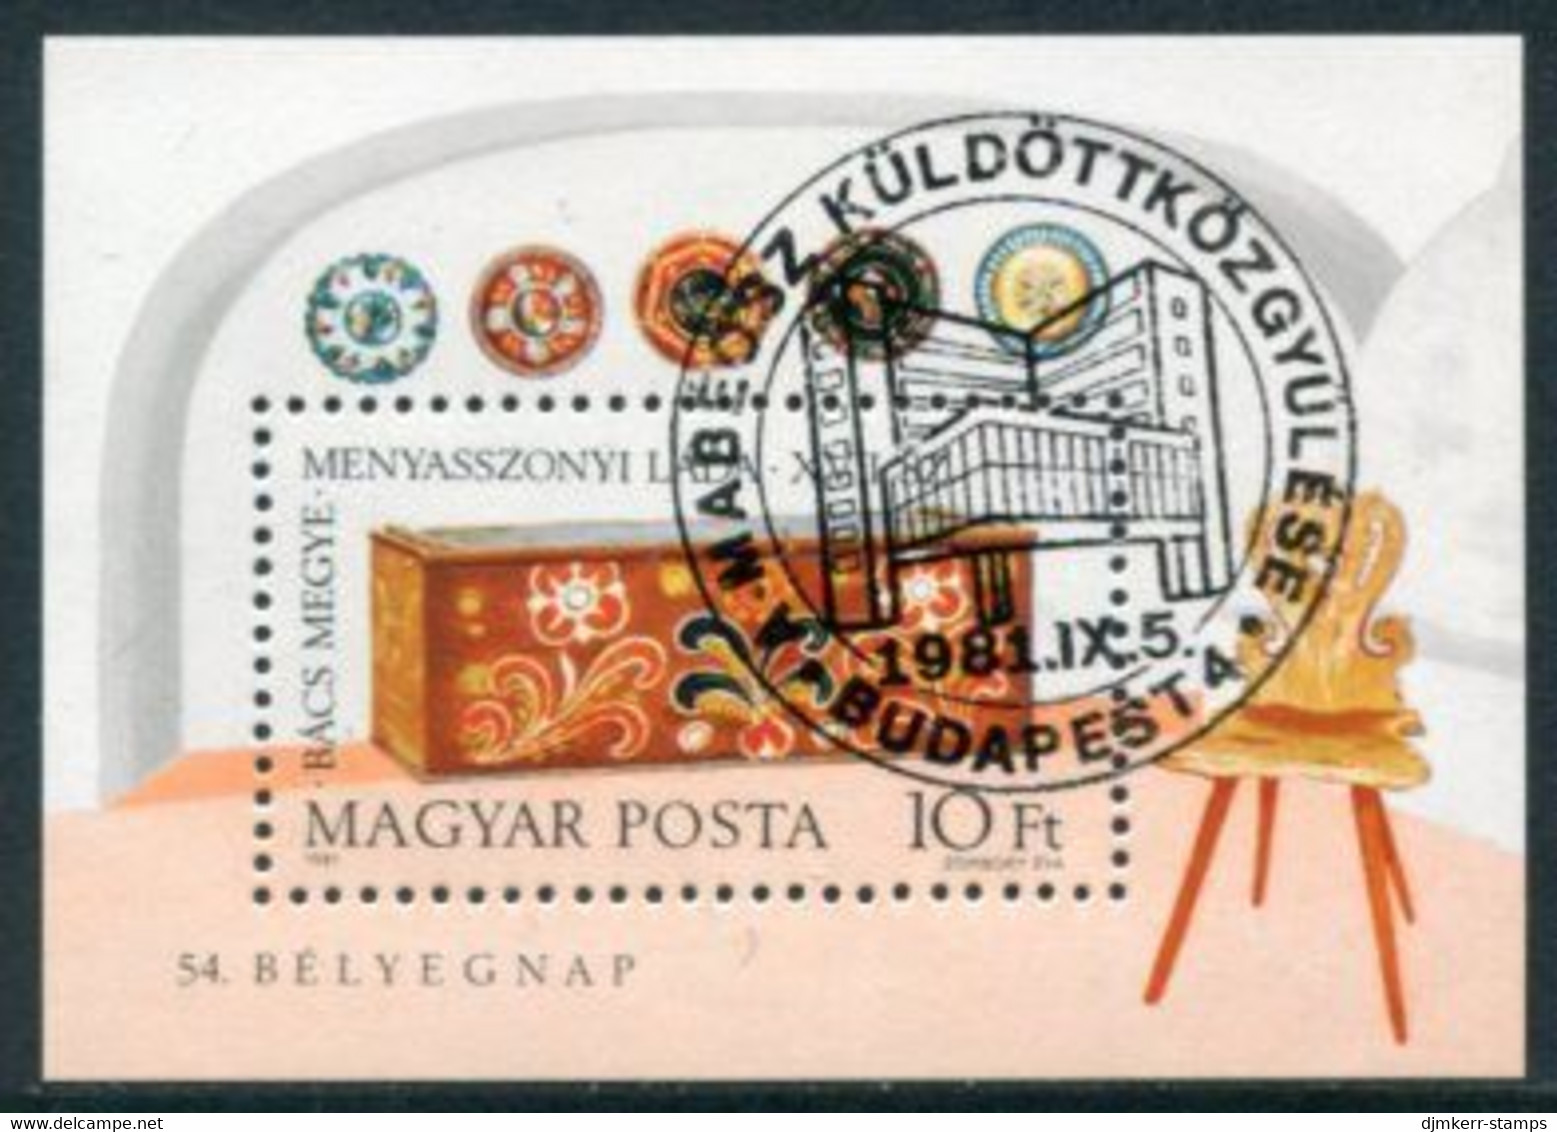 HUNGARY 1981 Stamp Day Block Used.  Michel Block 151 - Blocs-feuillets